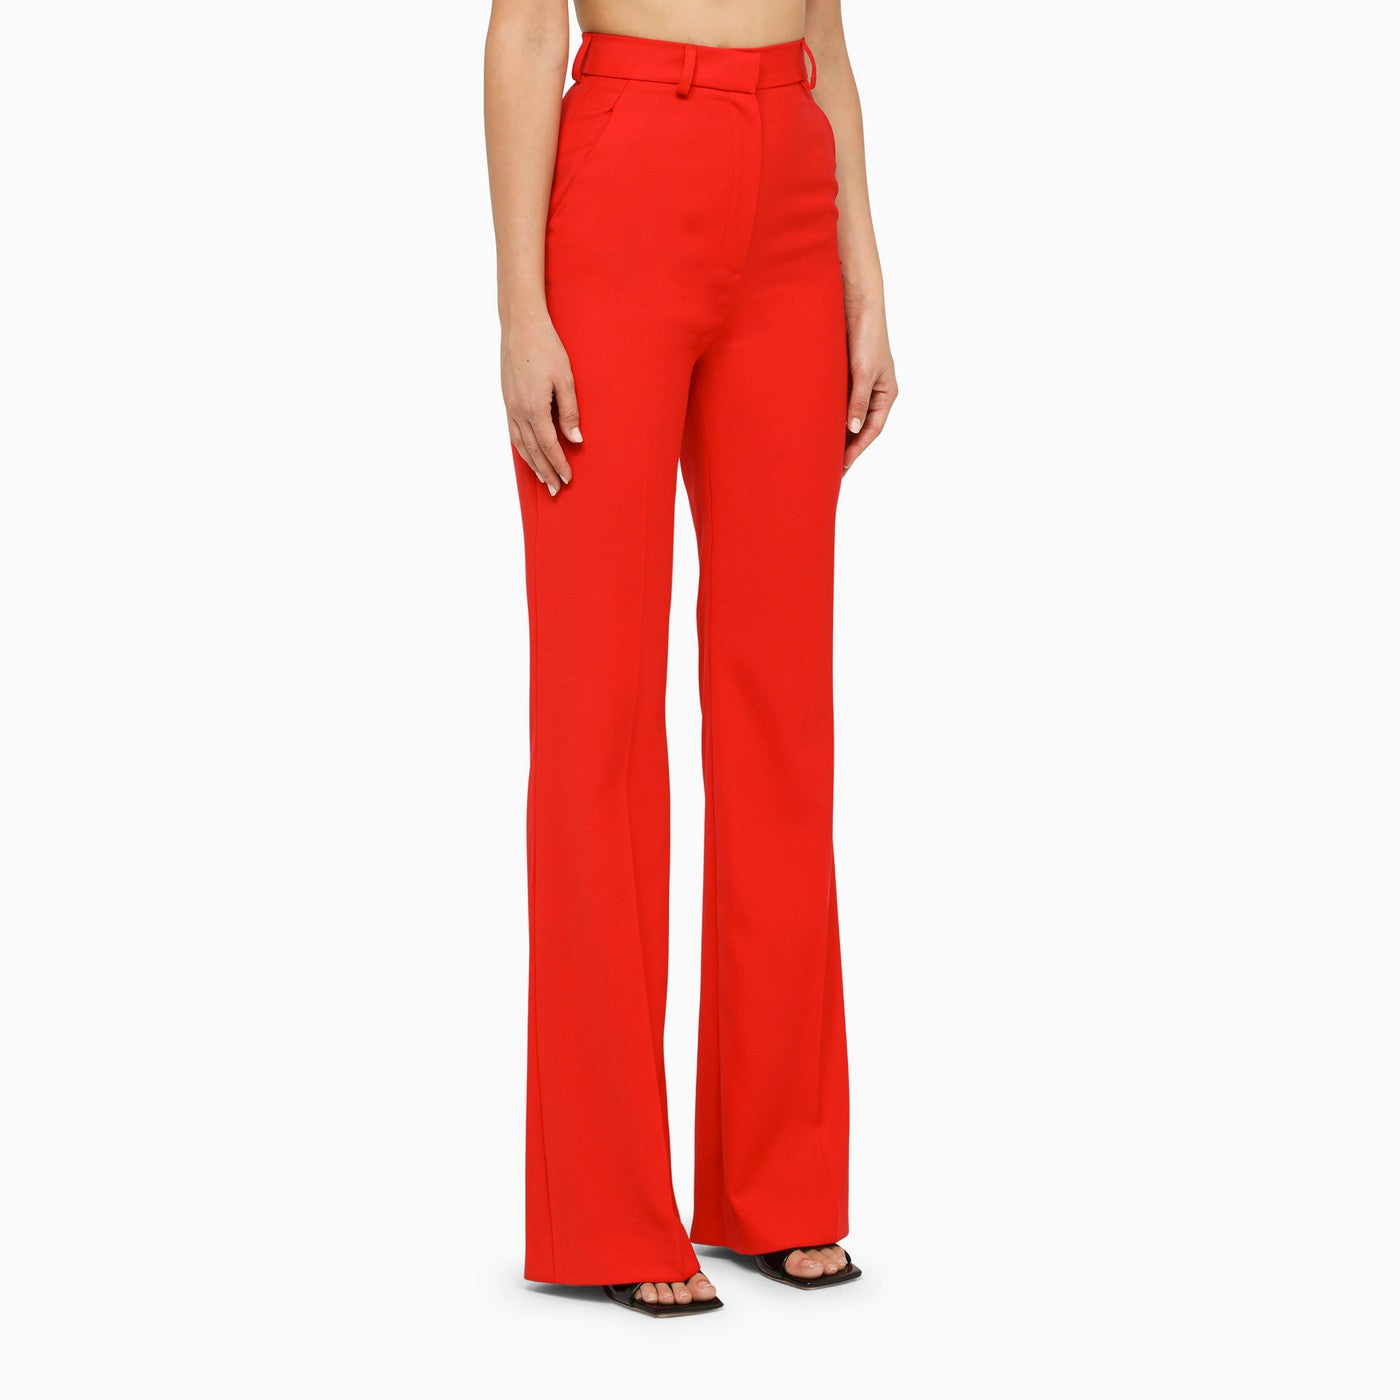 Red Flare Trousers - Stylish and Sophisticated